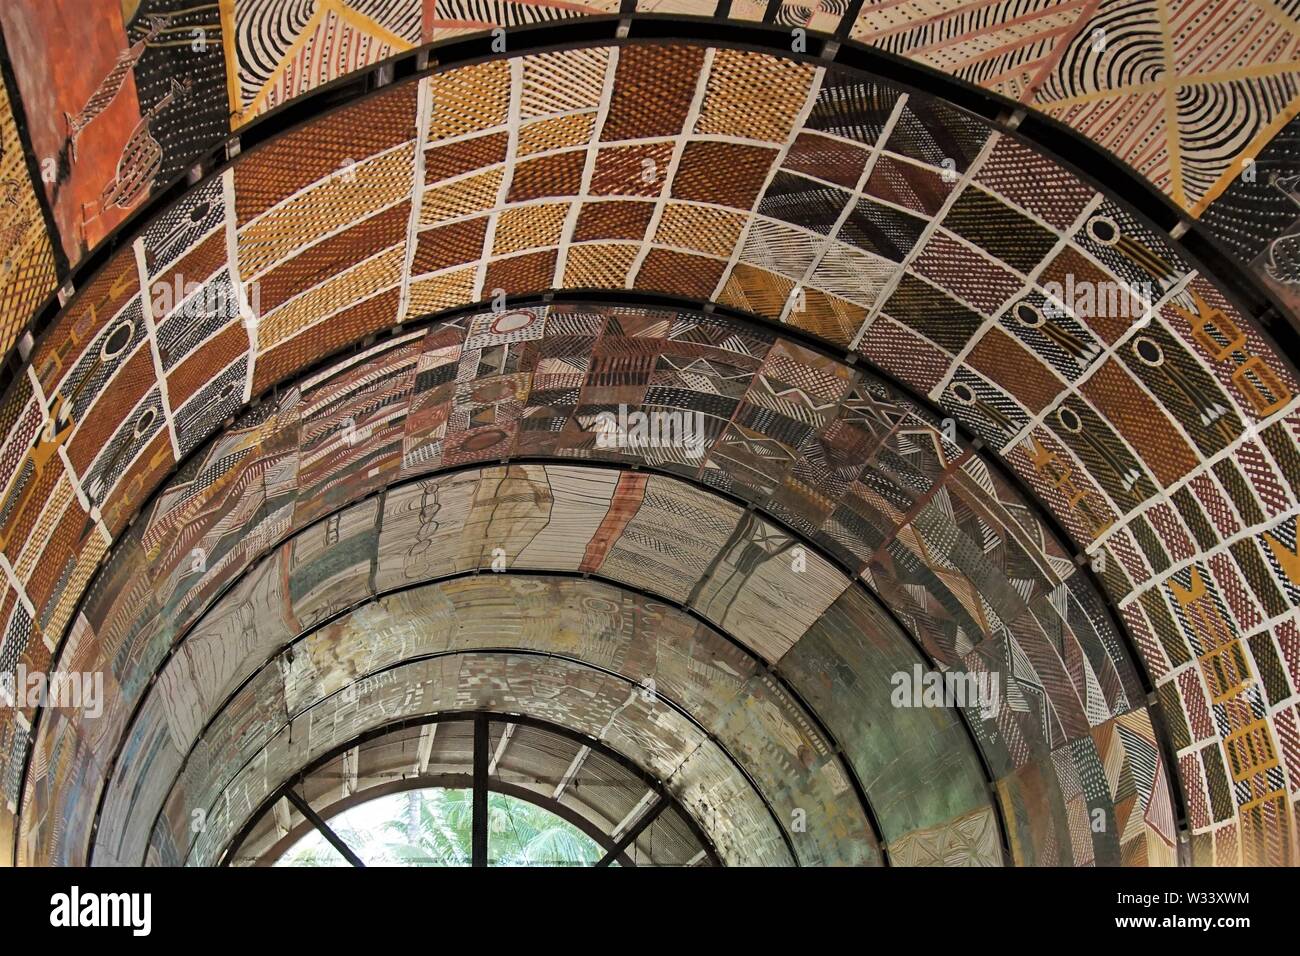 Interior View of the Domed Ceiling of The Keeping Place decorated with Traditional Tiwi Islands Art Stock Photo